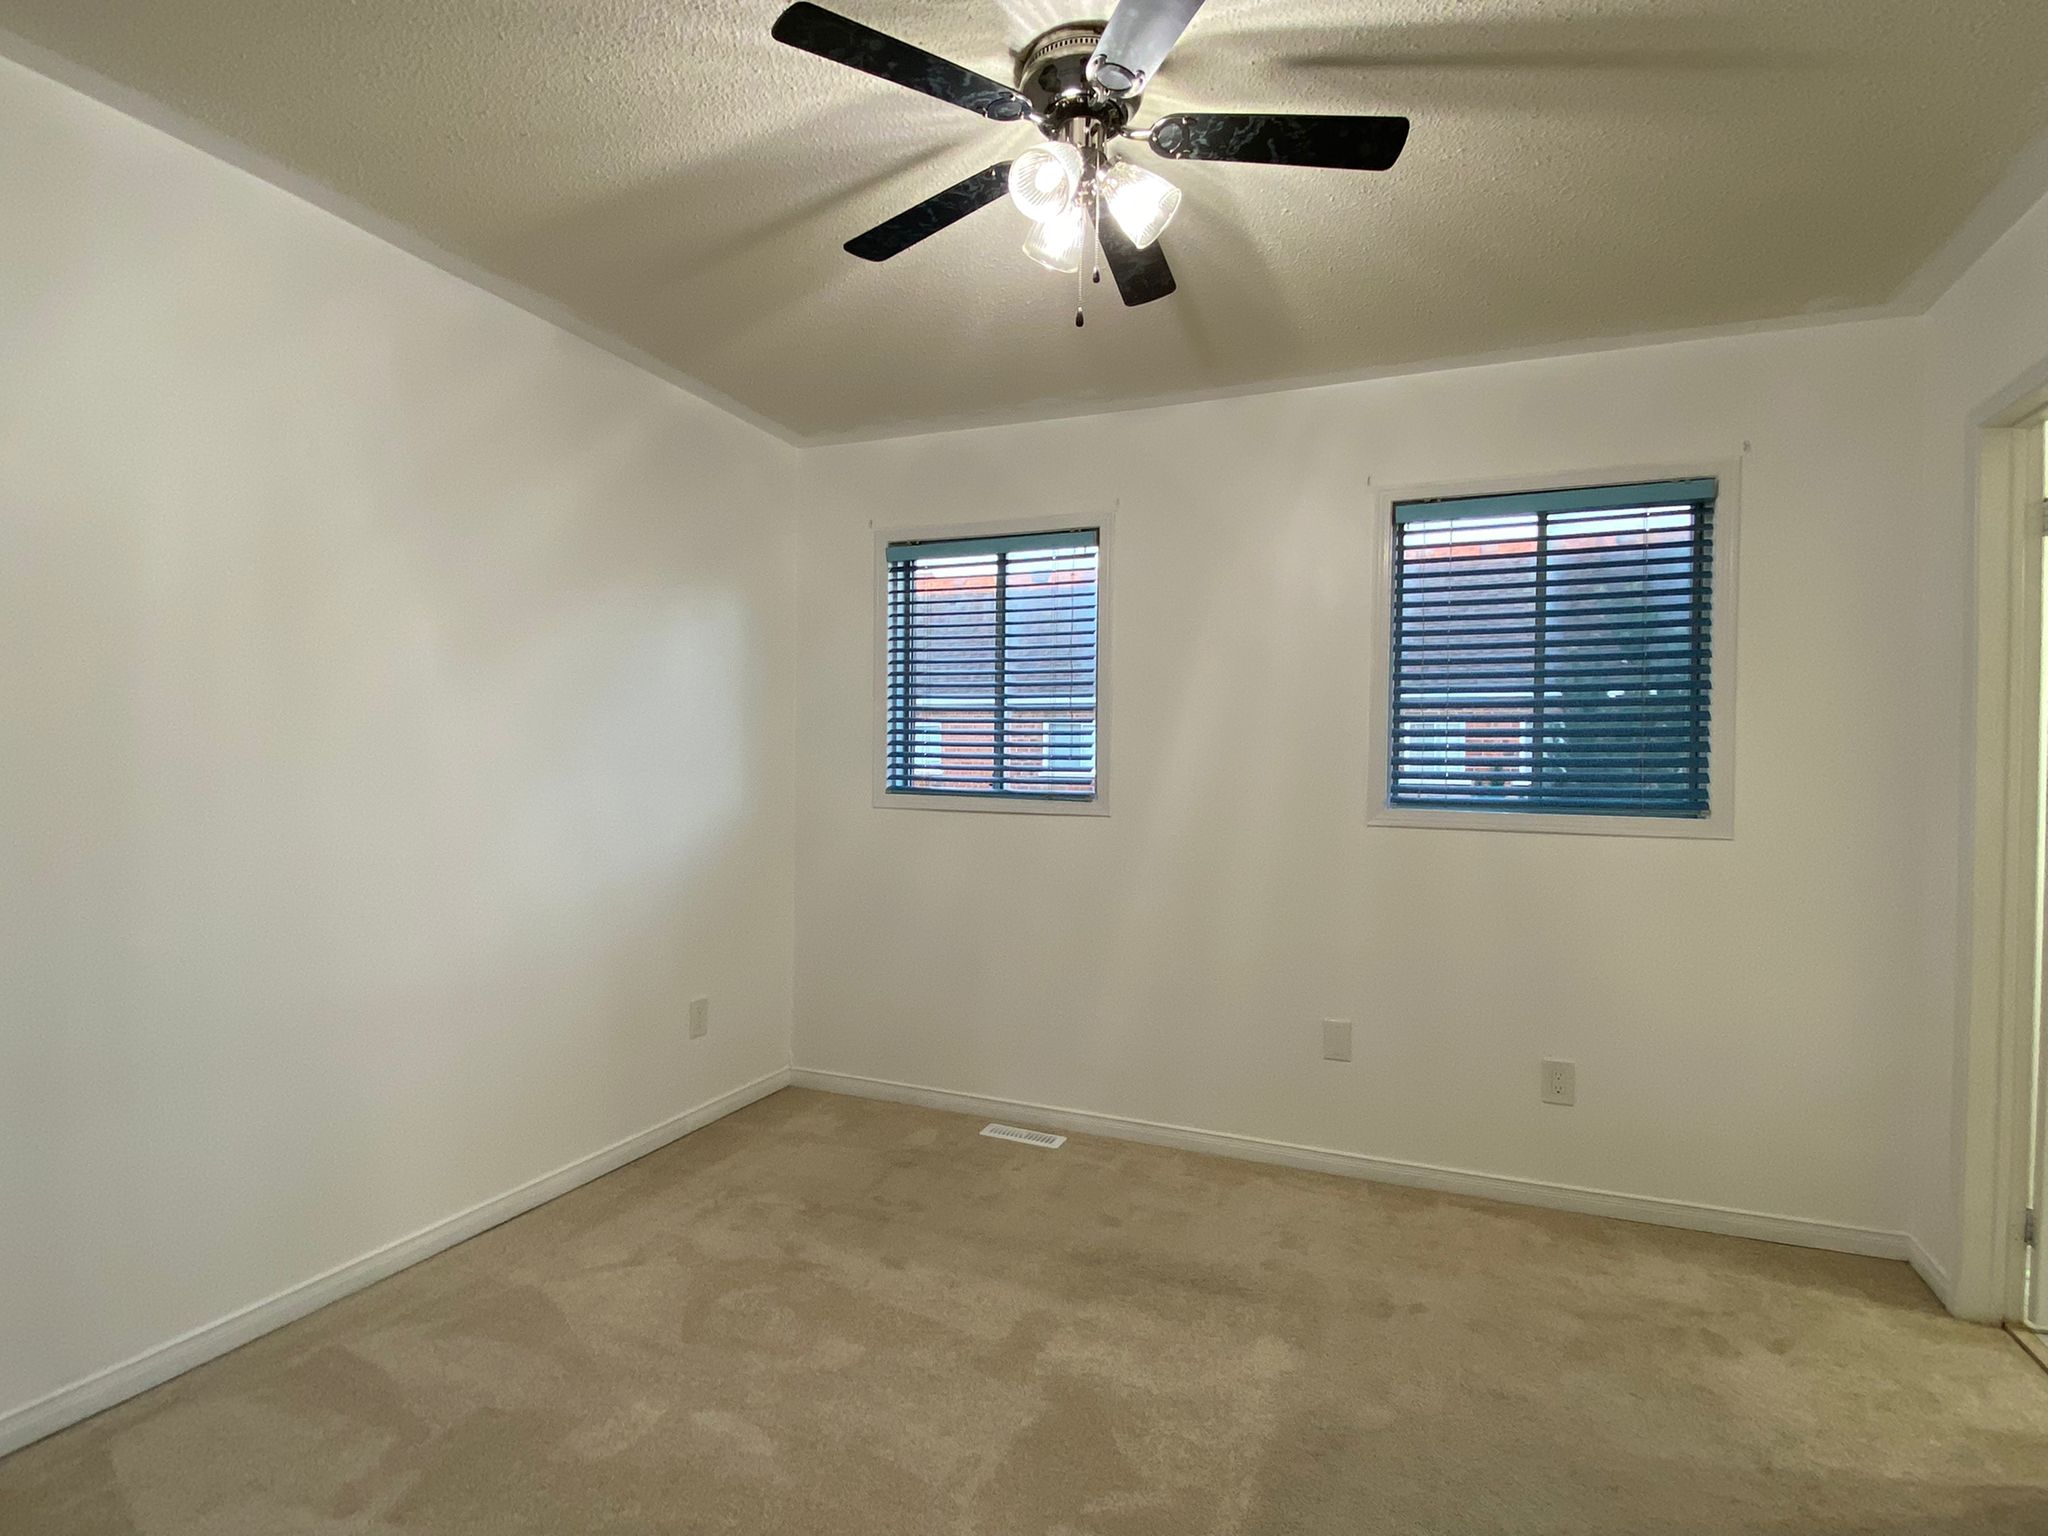 Empty room with fan hanging